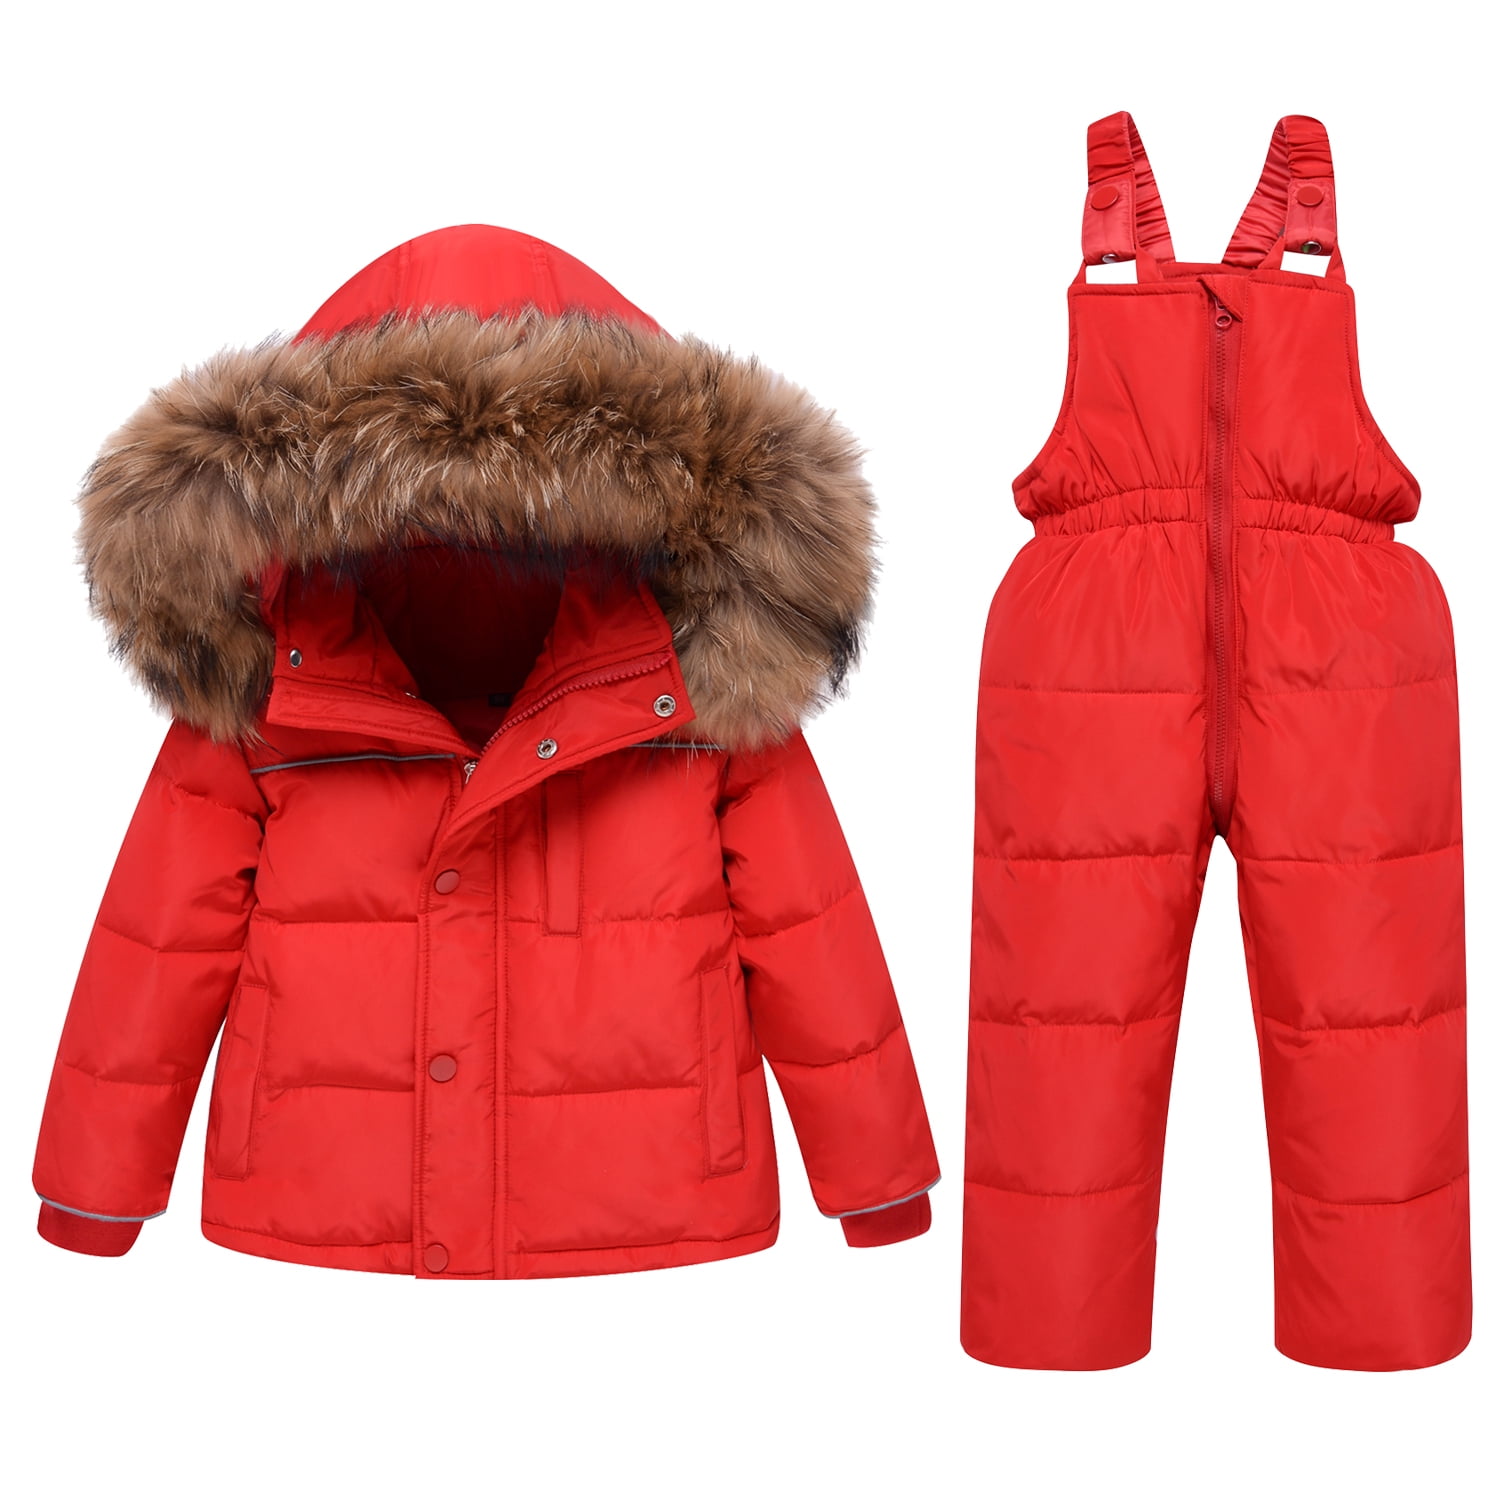 SANMIO Baby Girls Boys Down Jacket Snowsuit with Artificial Fur Hooded Clothing Set Kids Thickened Winter Jacket Winter Trousers Toddler Down Pants Kids Ski Suit 